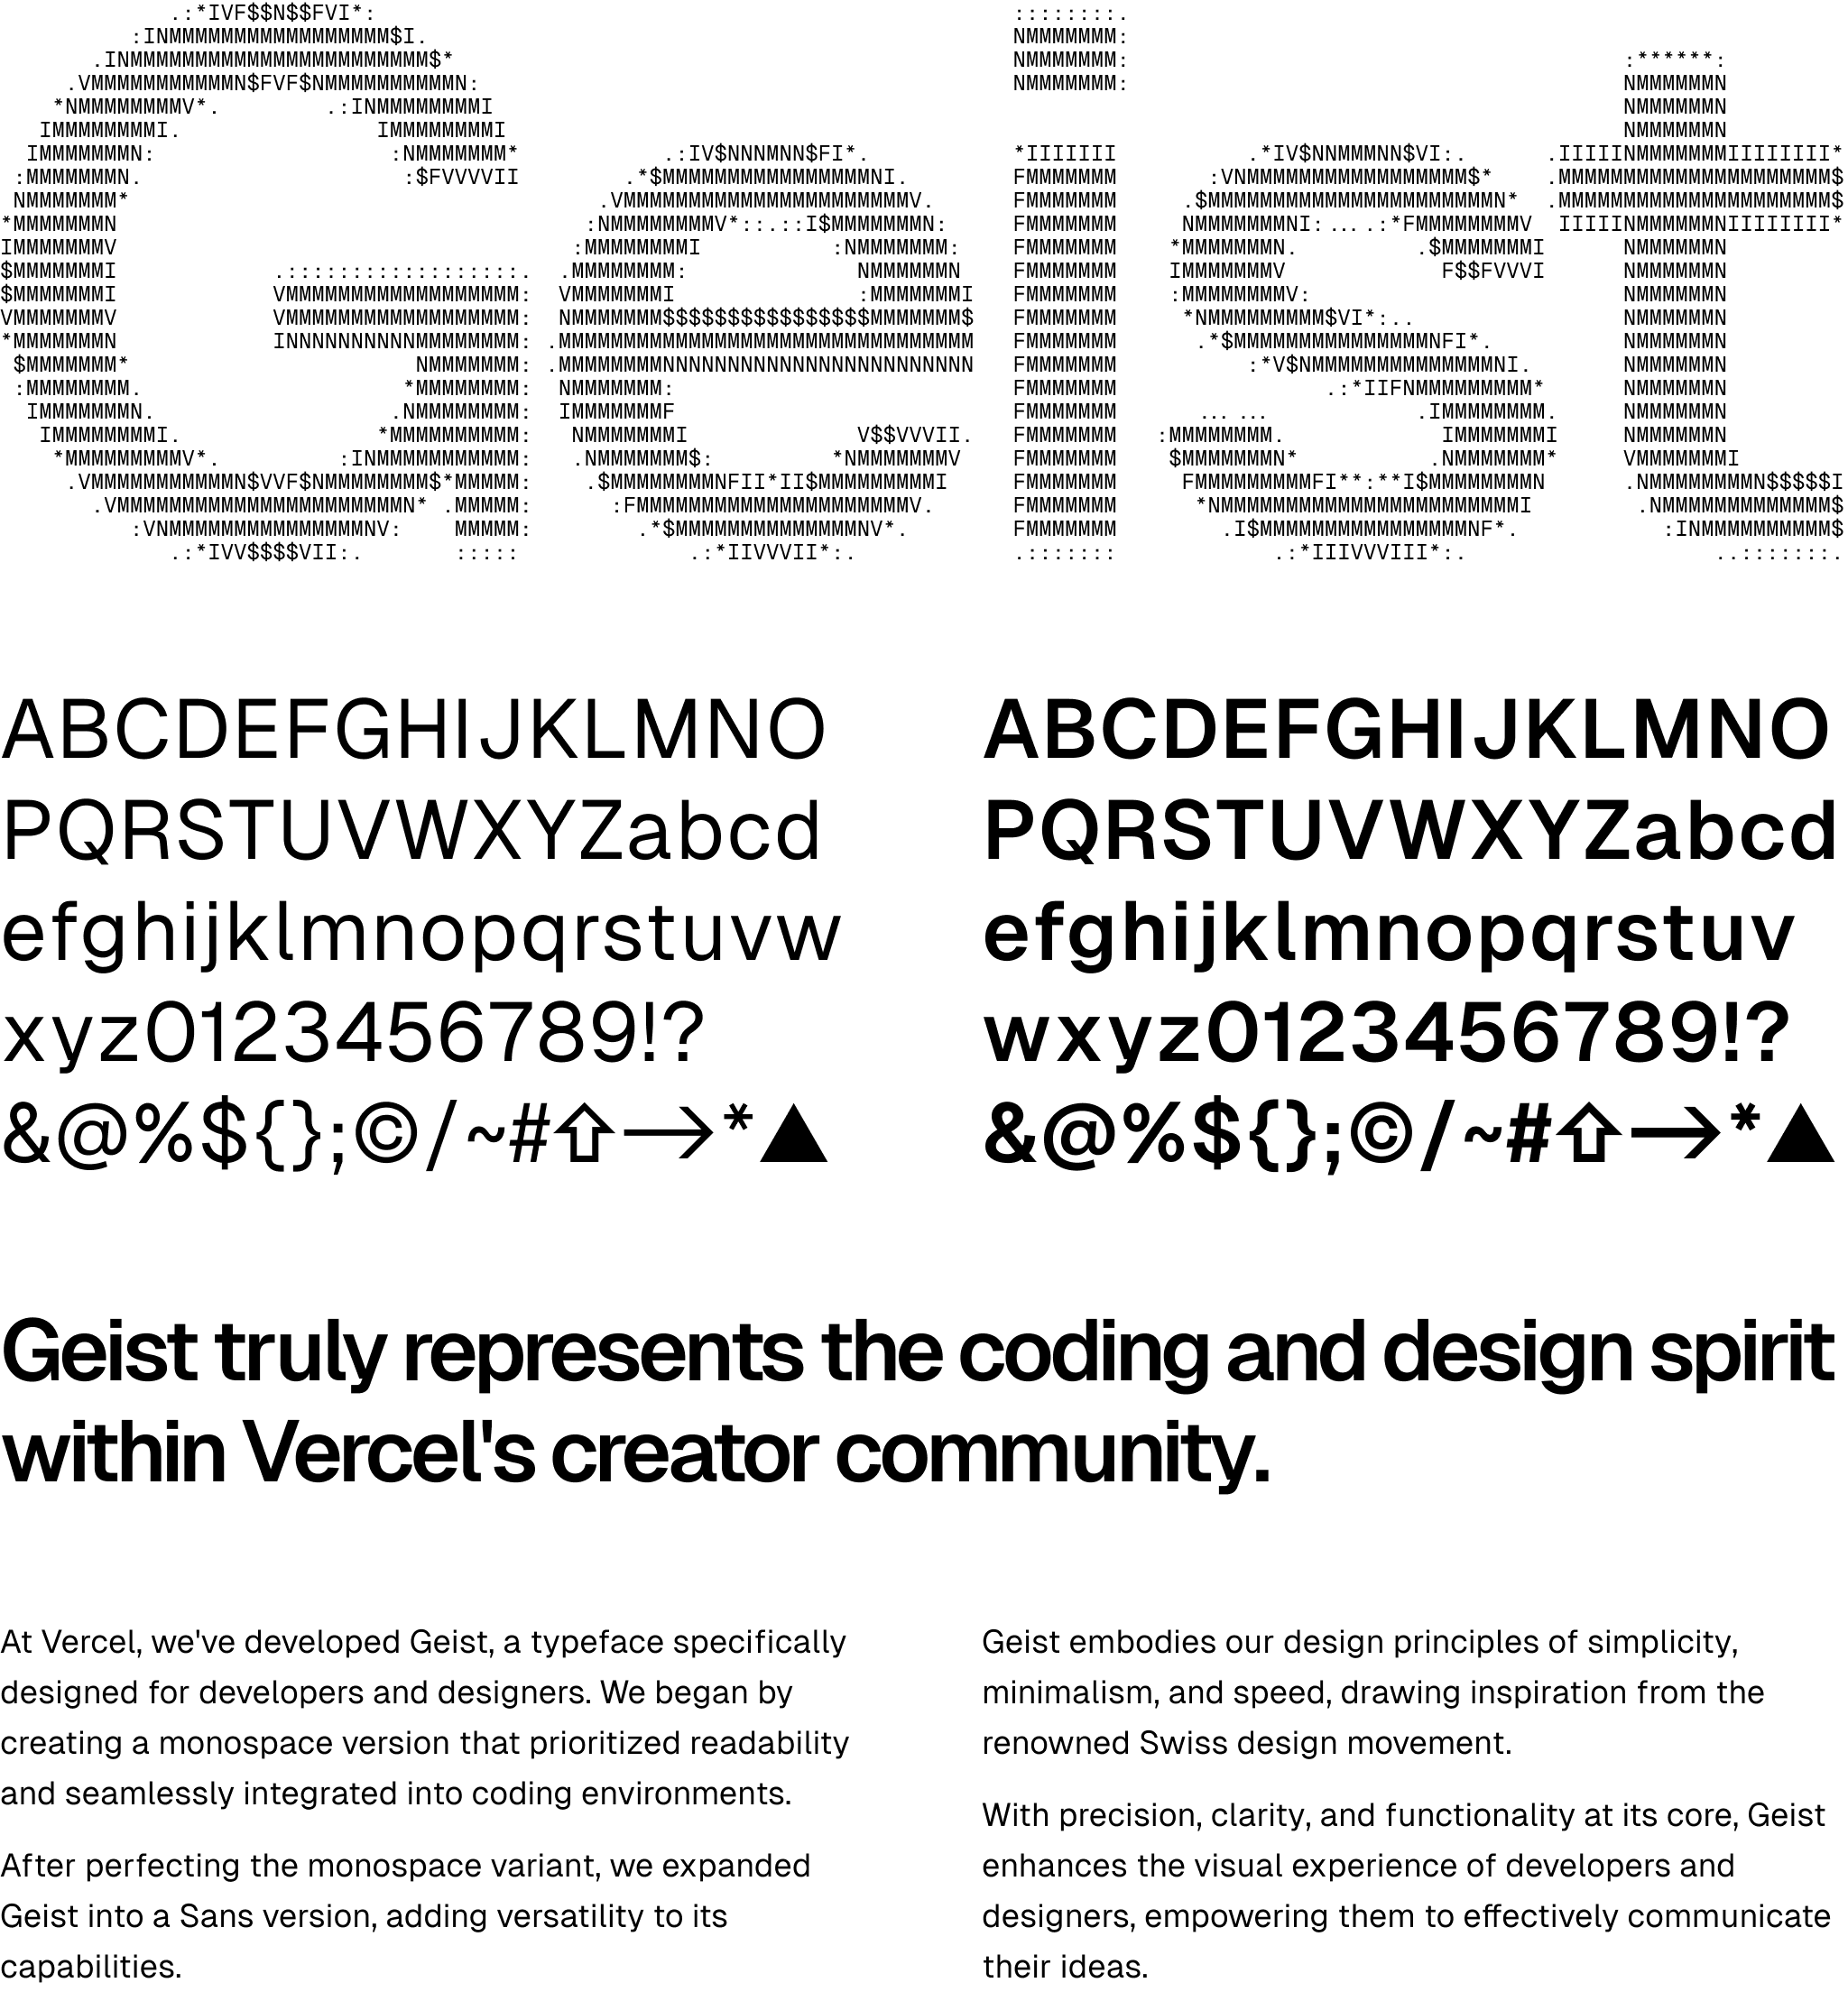 The words “Geist” written as ASCII art in Geist Mono resembling Geist Sans. After this is a demonstration of Geist Sans in regular and bold face that shows alphanumeric characters and some symbols, notably a symbol for Shift, a right arrow, and the Vercel logo. Below is some text written in Geist - a heading: “Geist truly represents the coding and design spirit within Vercel's creator community.”, one paragraph: “At Vercel, we've developed Geist, a typeface specifically designed for developers and designers. We began by creating a monospace version that prioritized readability and seamlessly integrated into coding environments. After perfecting the monospace variant, we expanded Geist into a Sans version, adding versatility to its capabilities.”, and another next to it: “Geist embodies our design principles of simplicity, minimalism, and speed, drawing inspiration from the renowned Swiss design movement. With precision, clarity, and functionality at its core, Geist enhances the visual experience of developers and designers, empowering them to effectively communicate their ideas.”